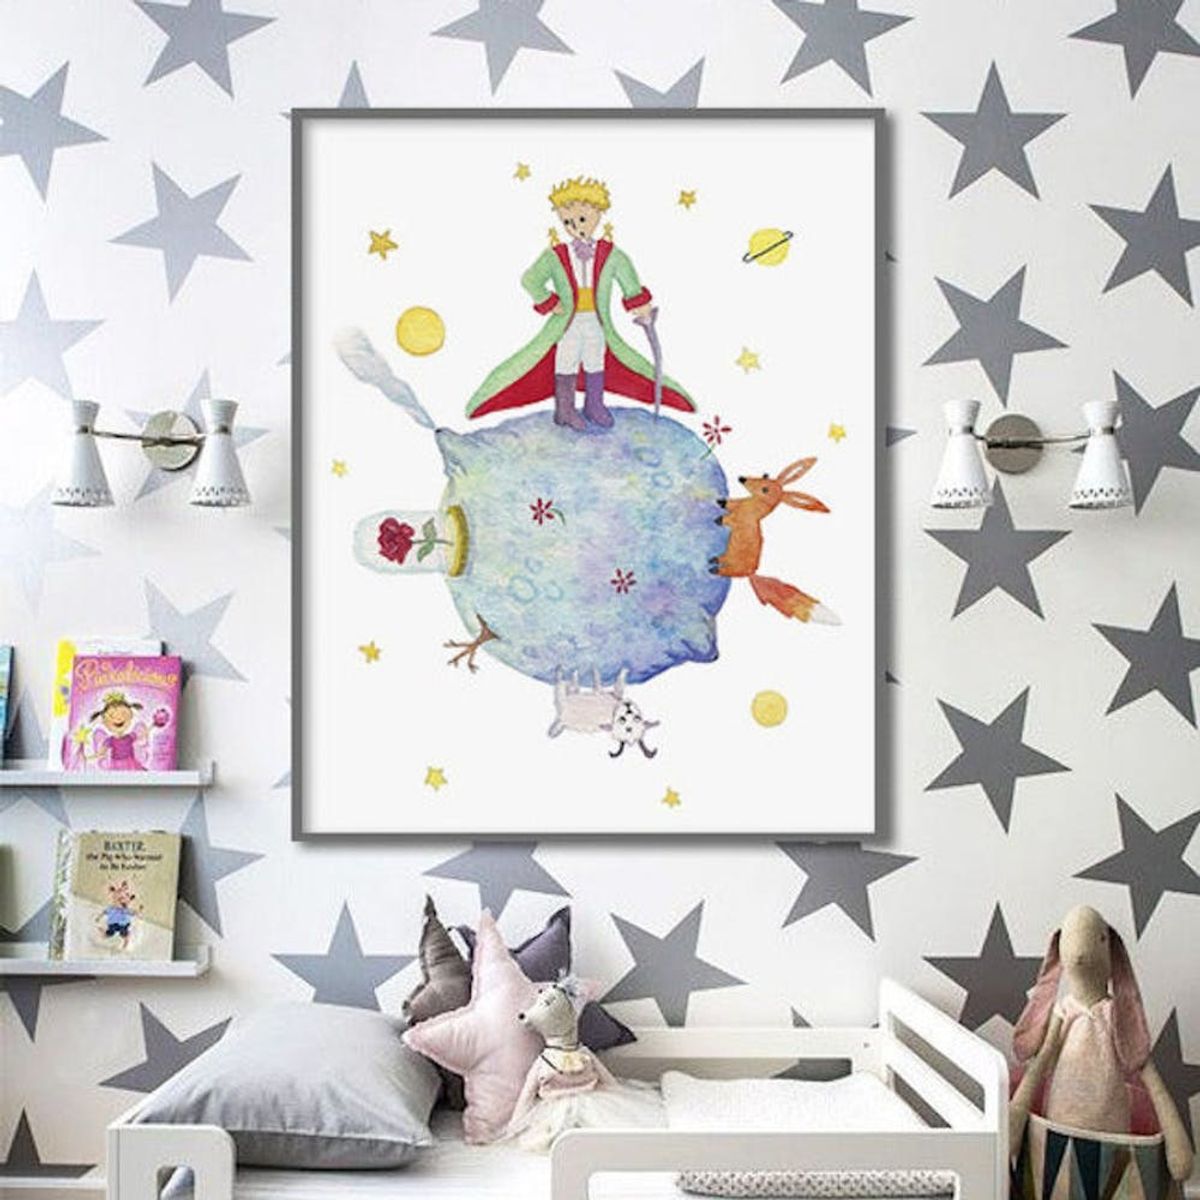 14 Delightfully Whimsical Ideas for Your Little Prince-Inspired Nursery